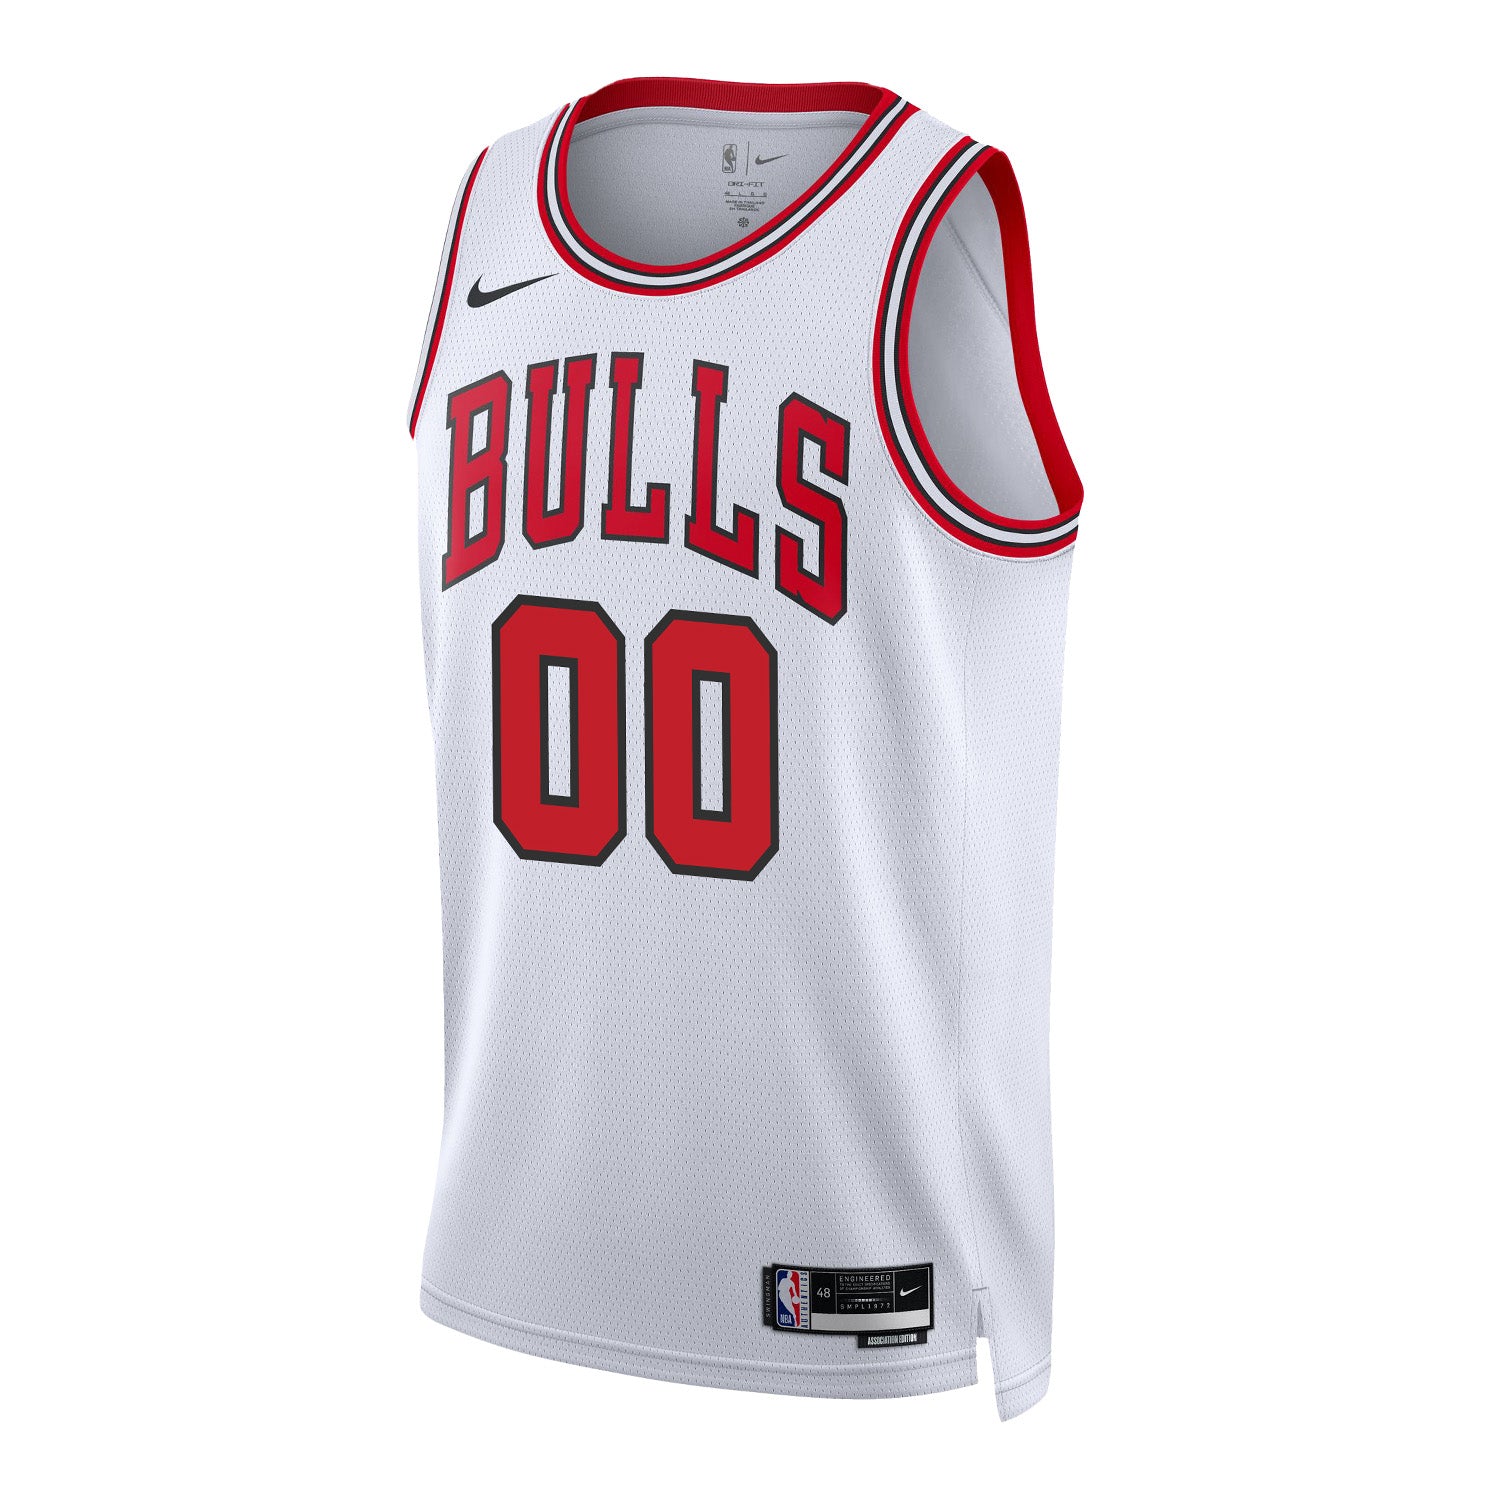 Youth Chicago Bulls Personalized Nike Association Swingman Jersey in white - front view